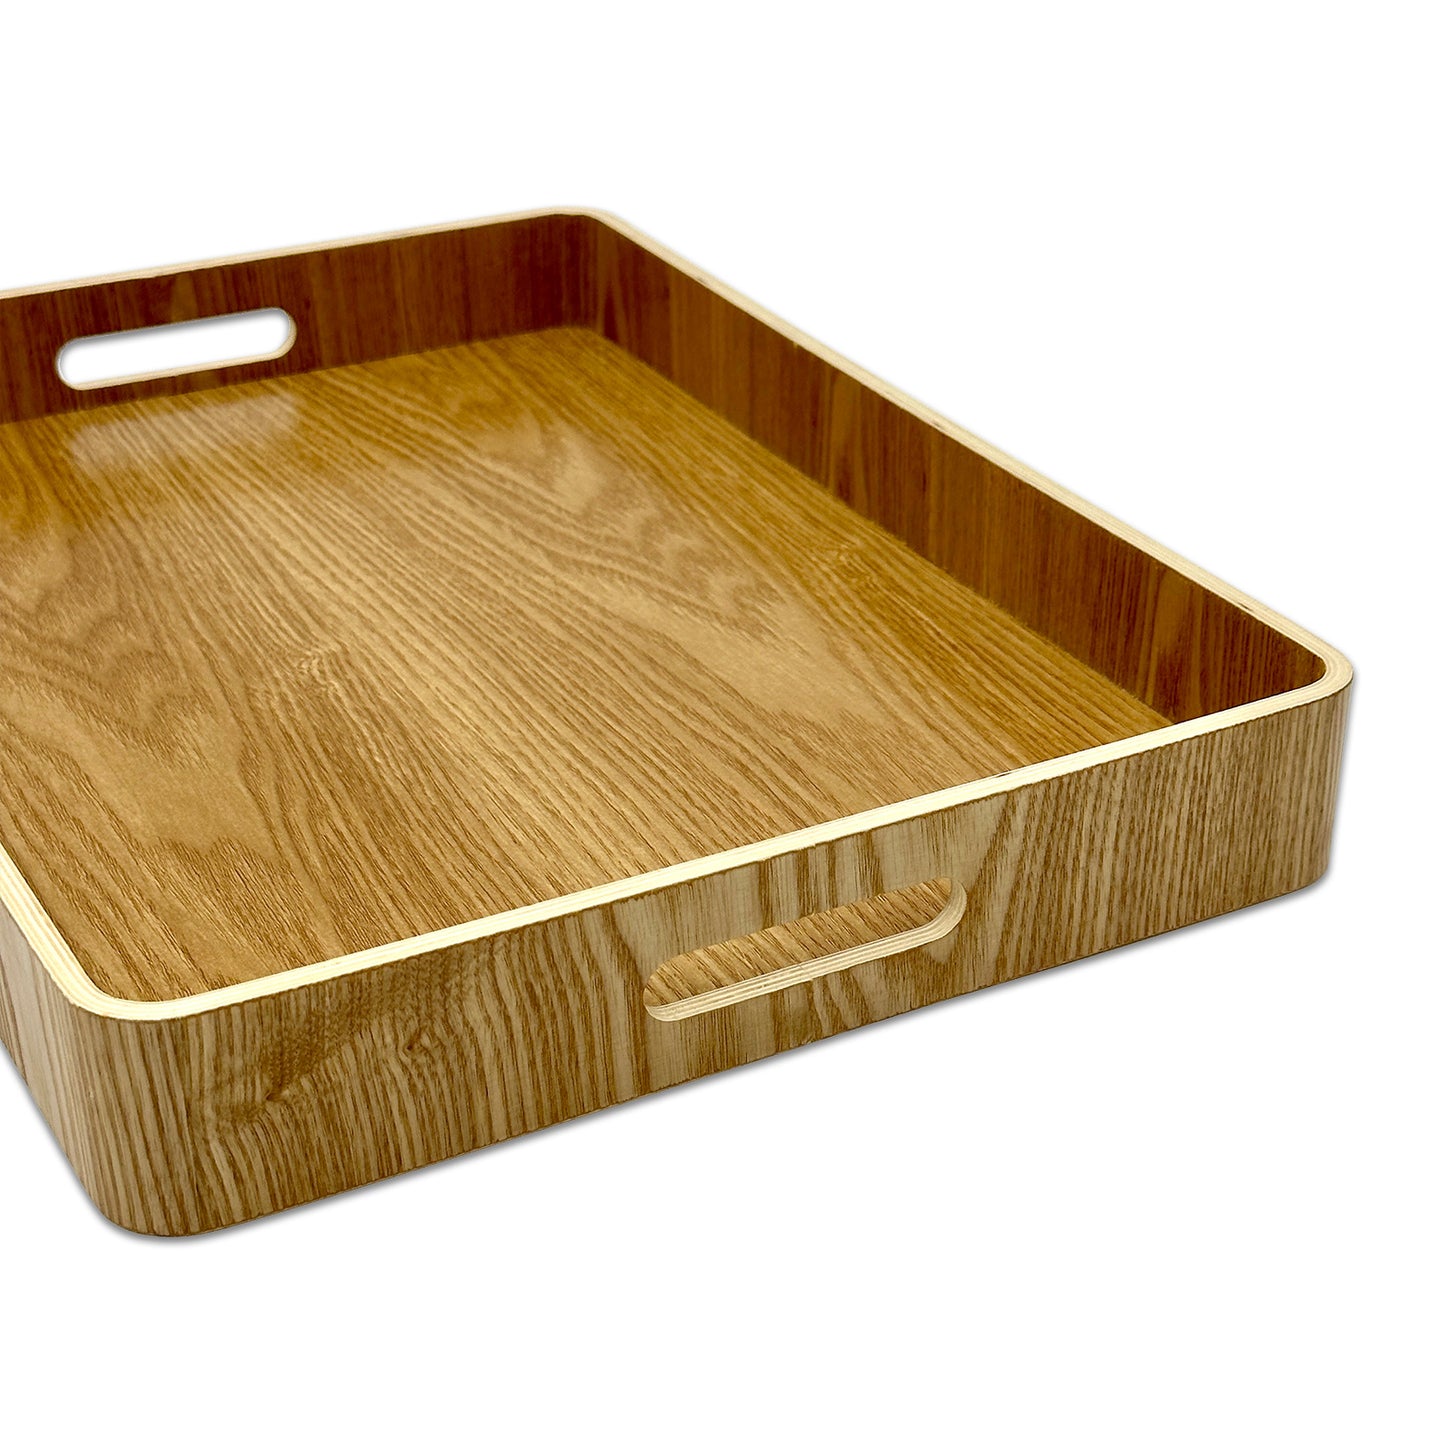 16 1/4" x 12" Natural Oak Finish Modern Serving Tray with Handles